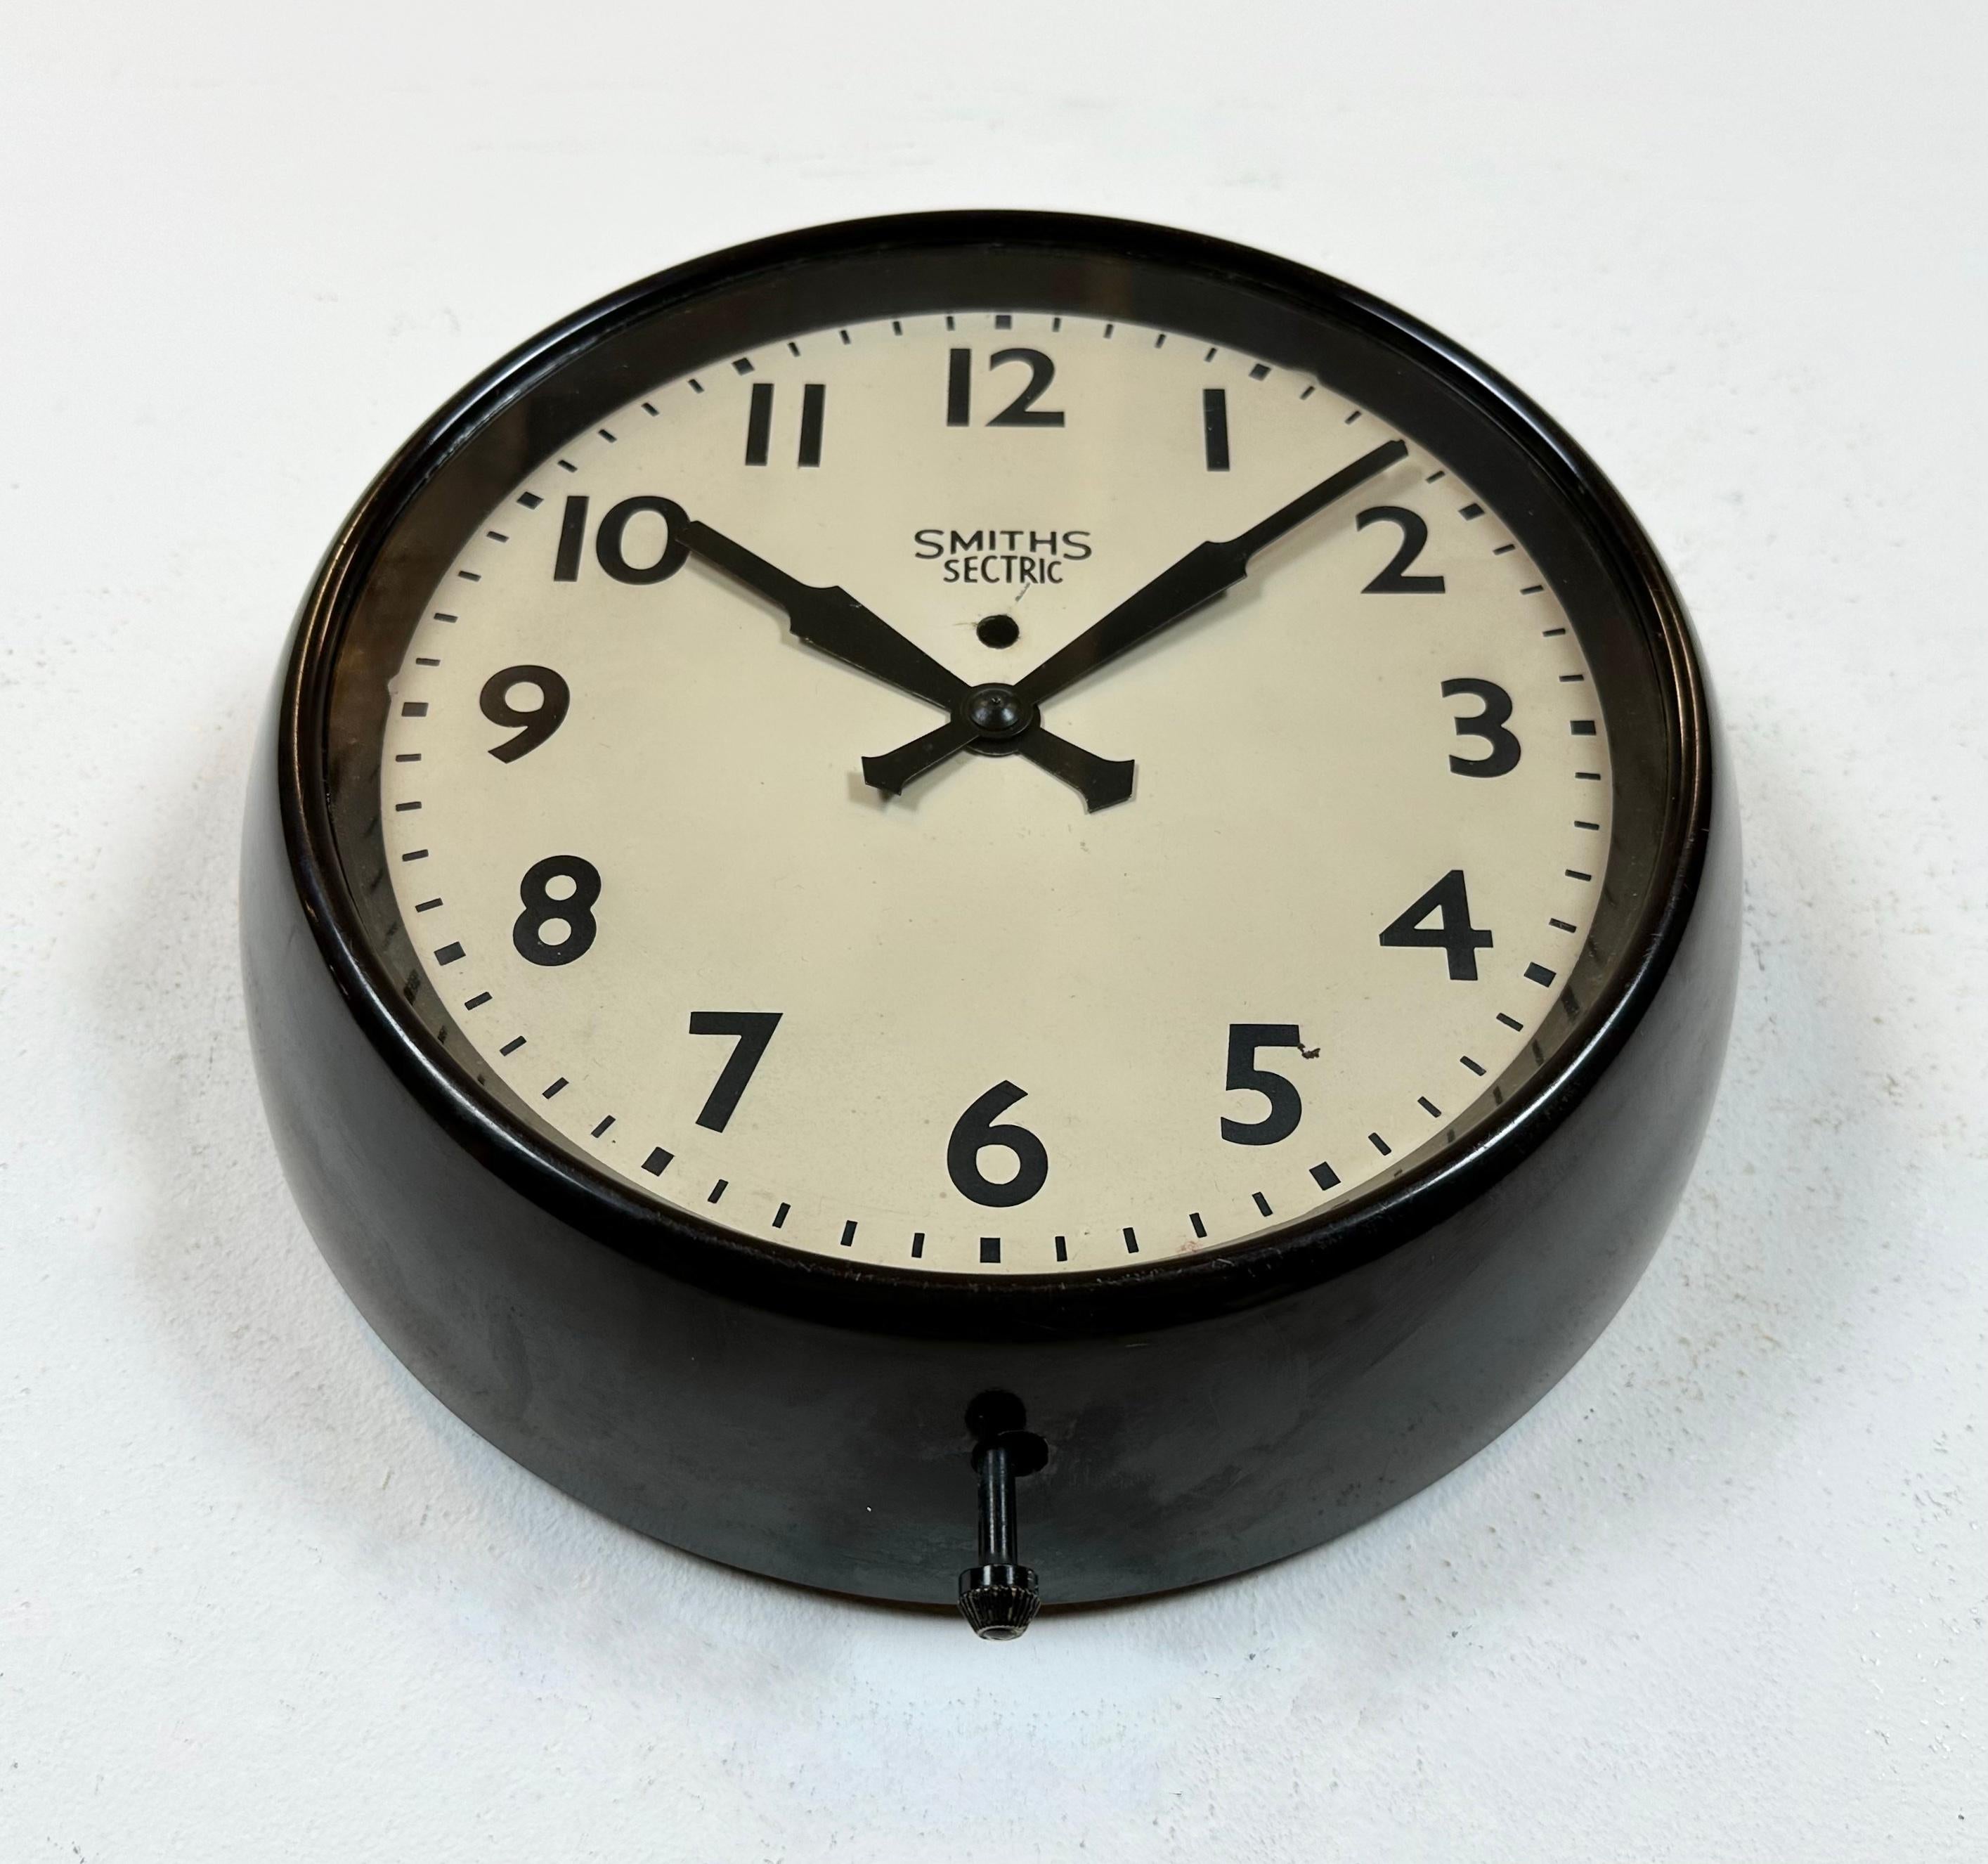 British Vintage Brown Bakelite Electric Wall Clock from Smiths Sectric, 1950s